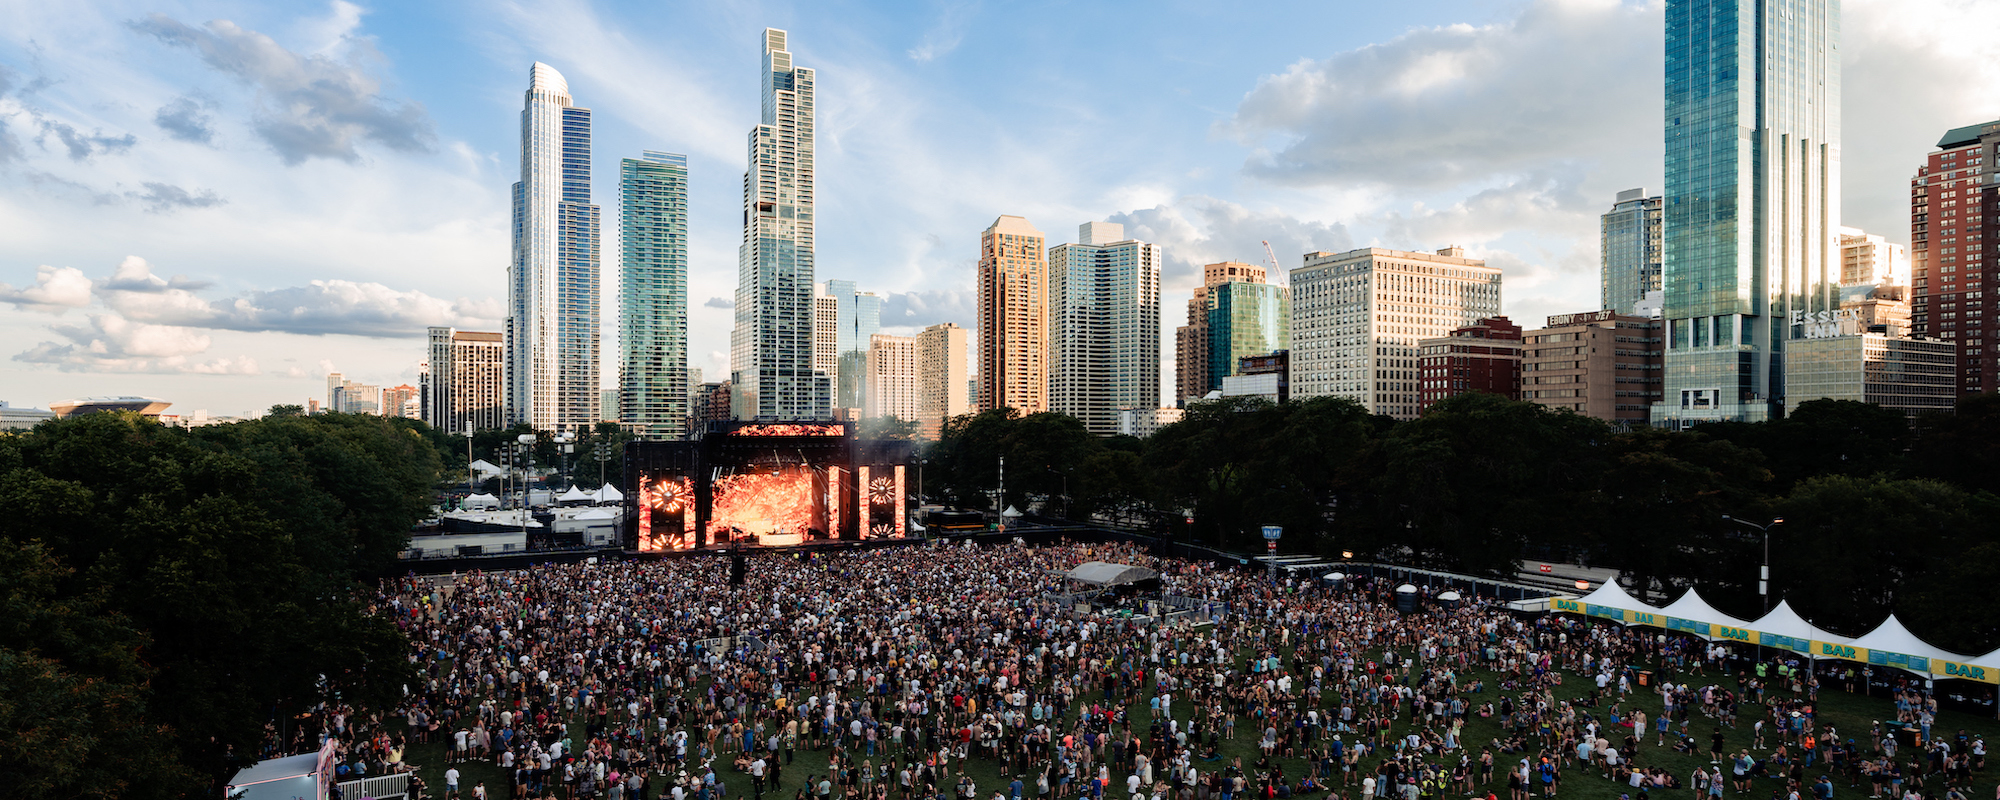 12 Music Festivals to Attend This Summer-Fall